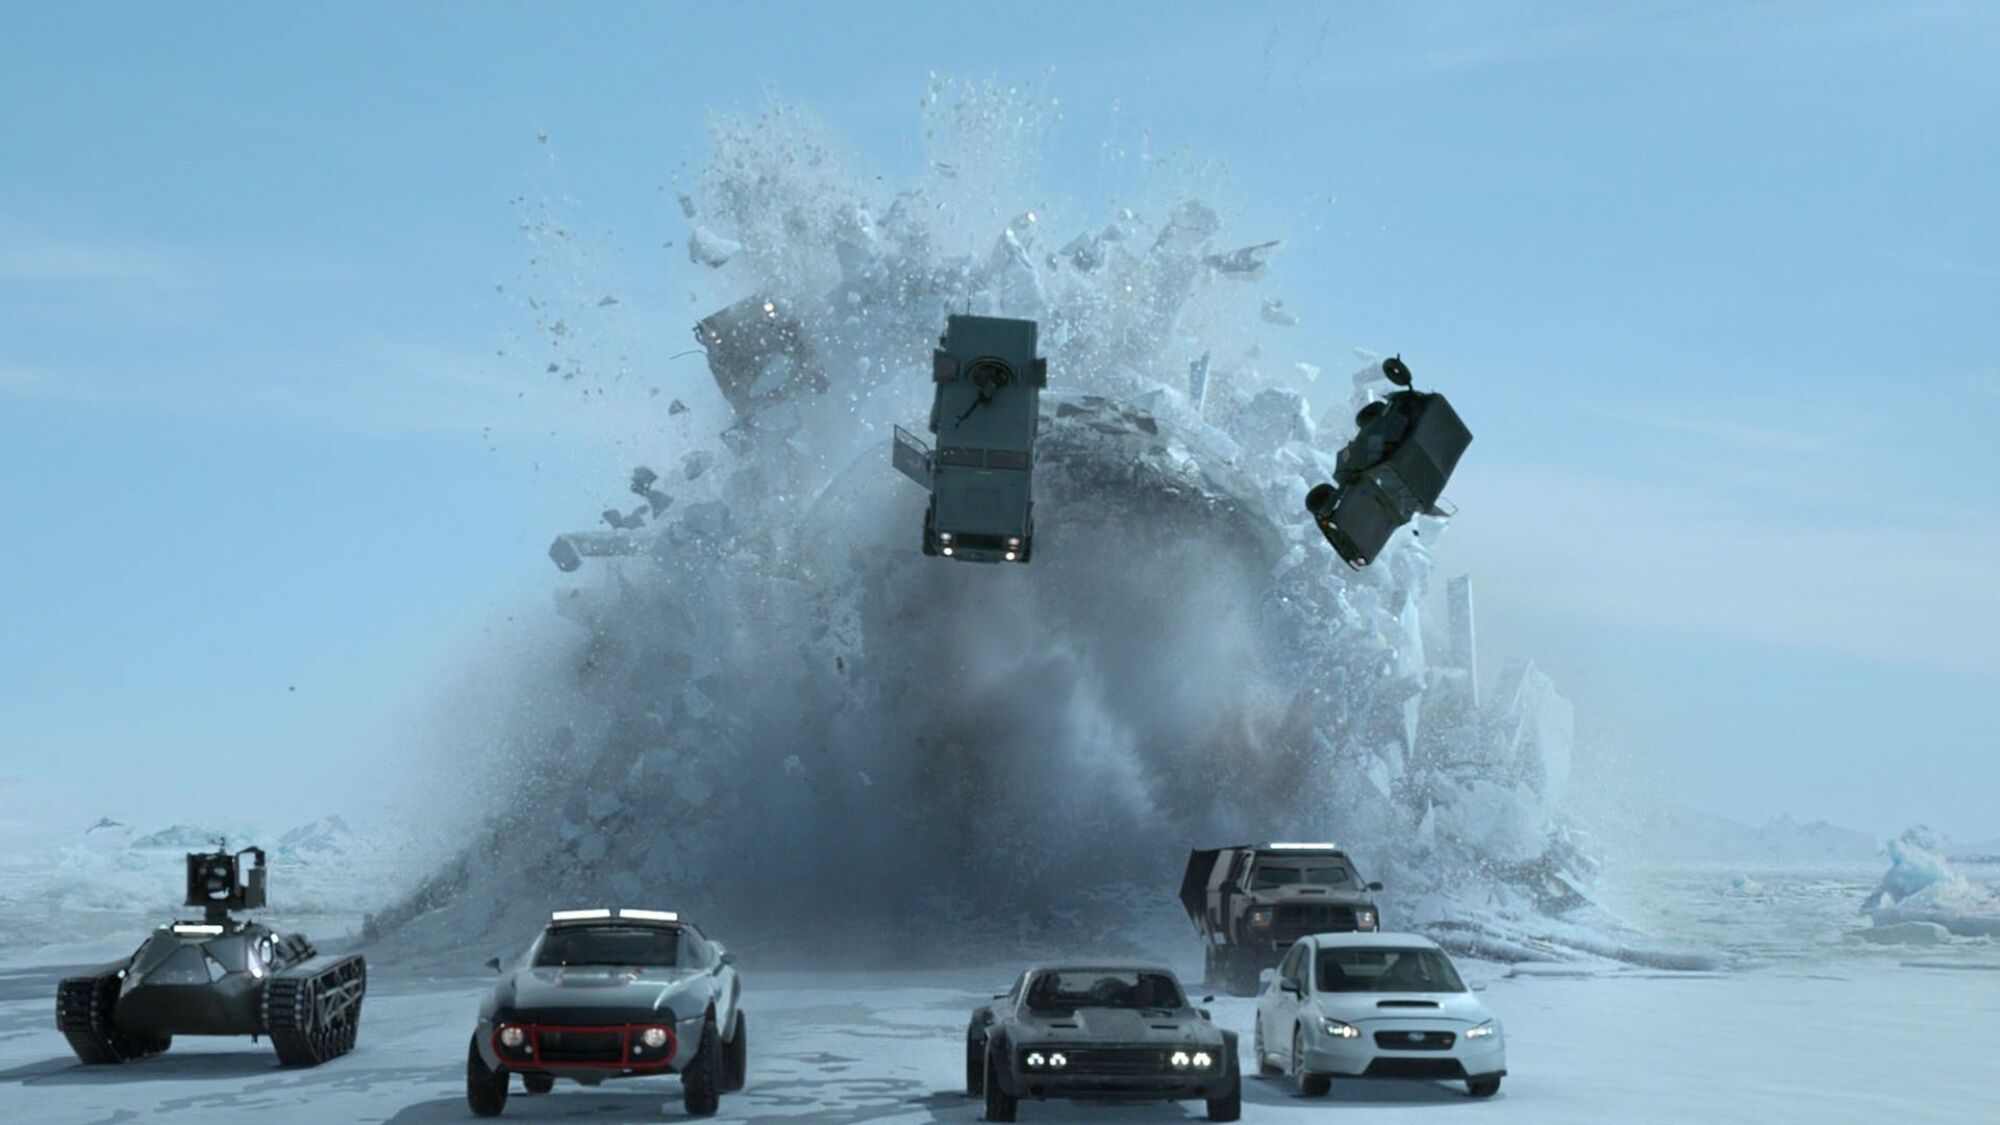 A submarine breaks through the ice, sending cars flying in "The Fate of the Furious"